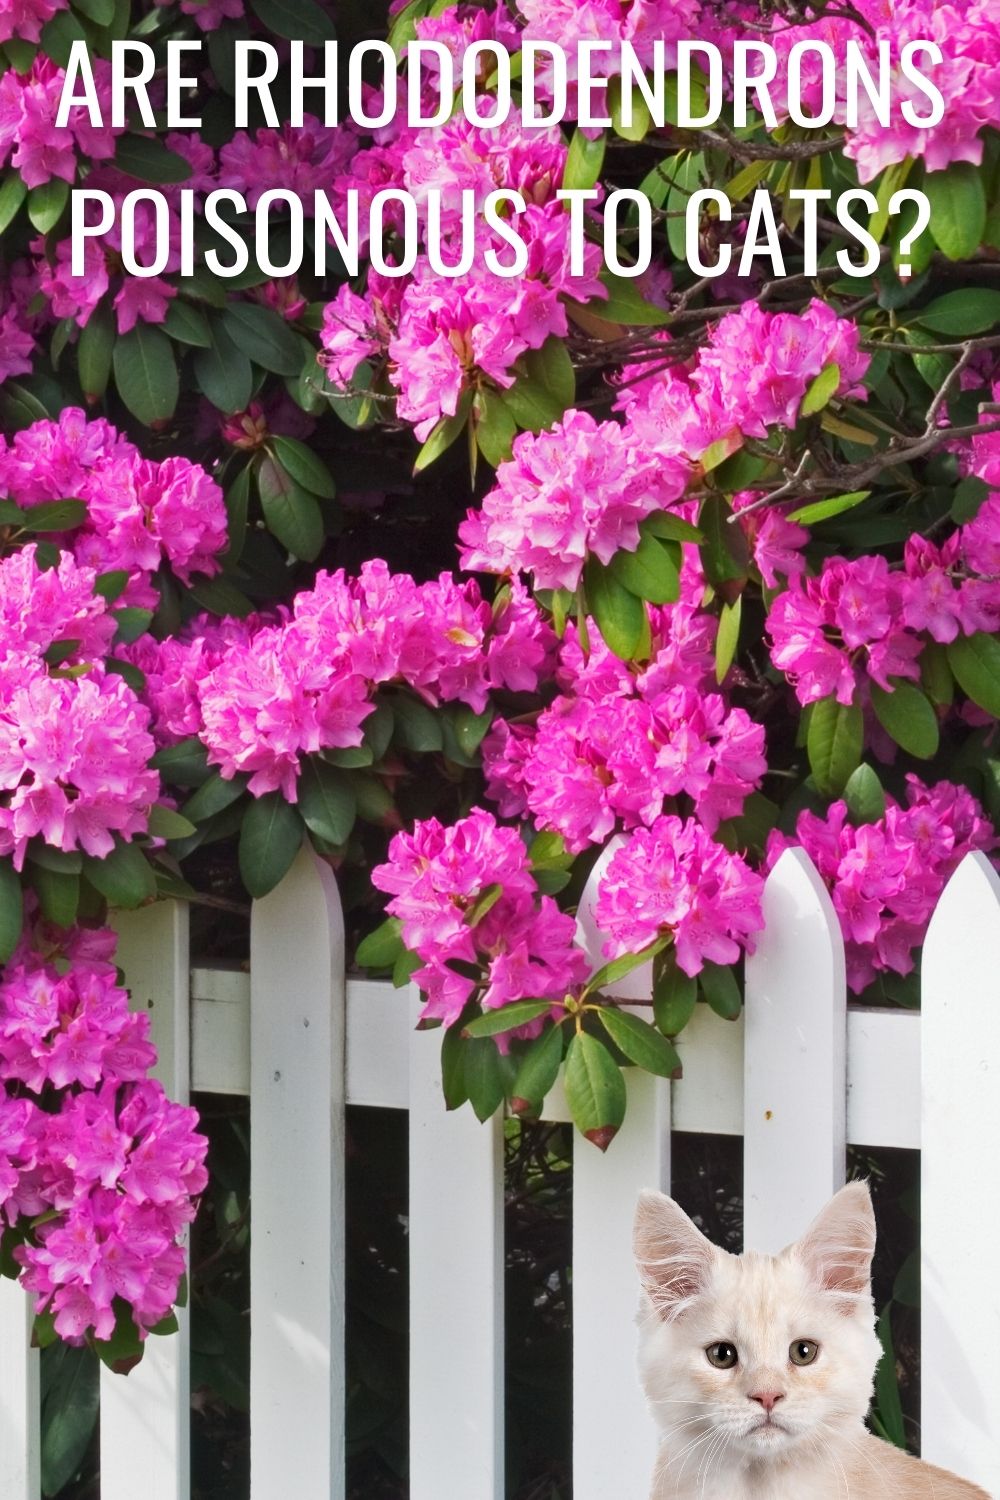 Are rhododendrons poisonous to cats?